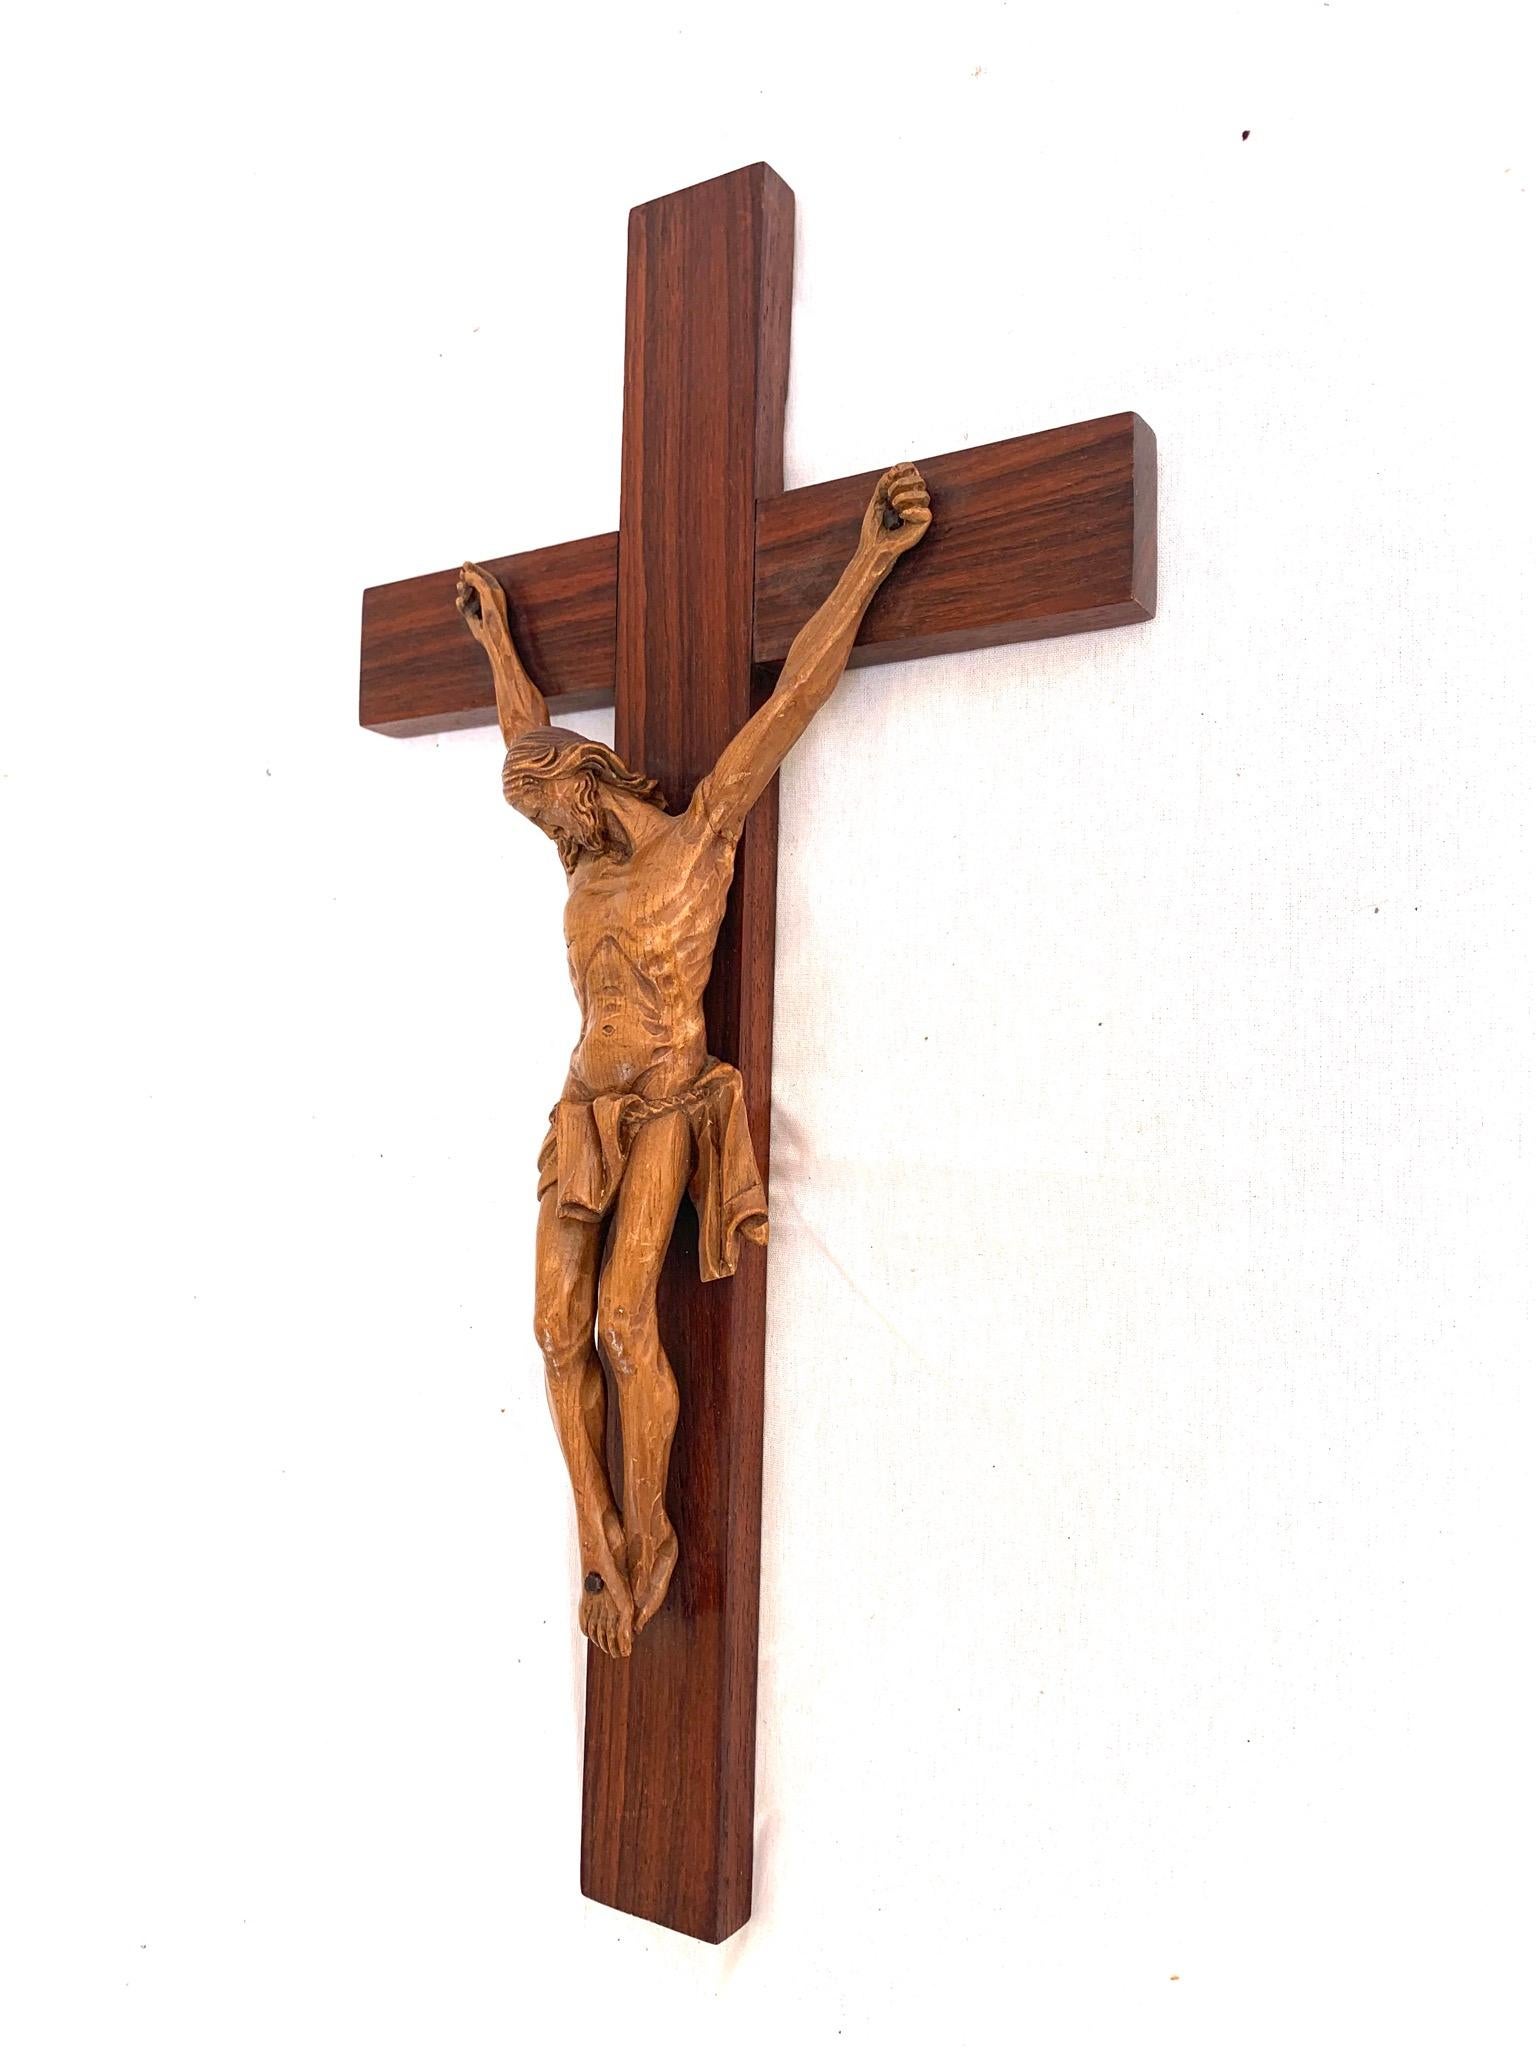 Another finely detailed, early 1900s coromandel wooden cross with a carved corpus of Christ.

This sacred and religious work of art is a hand-carved out of fruitwood Christ mounted on an wooden cross and this fine and detailed example is in